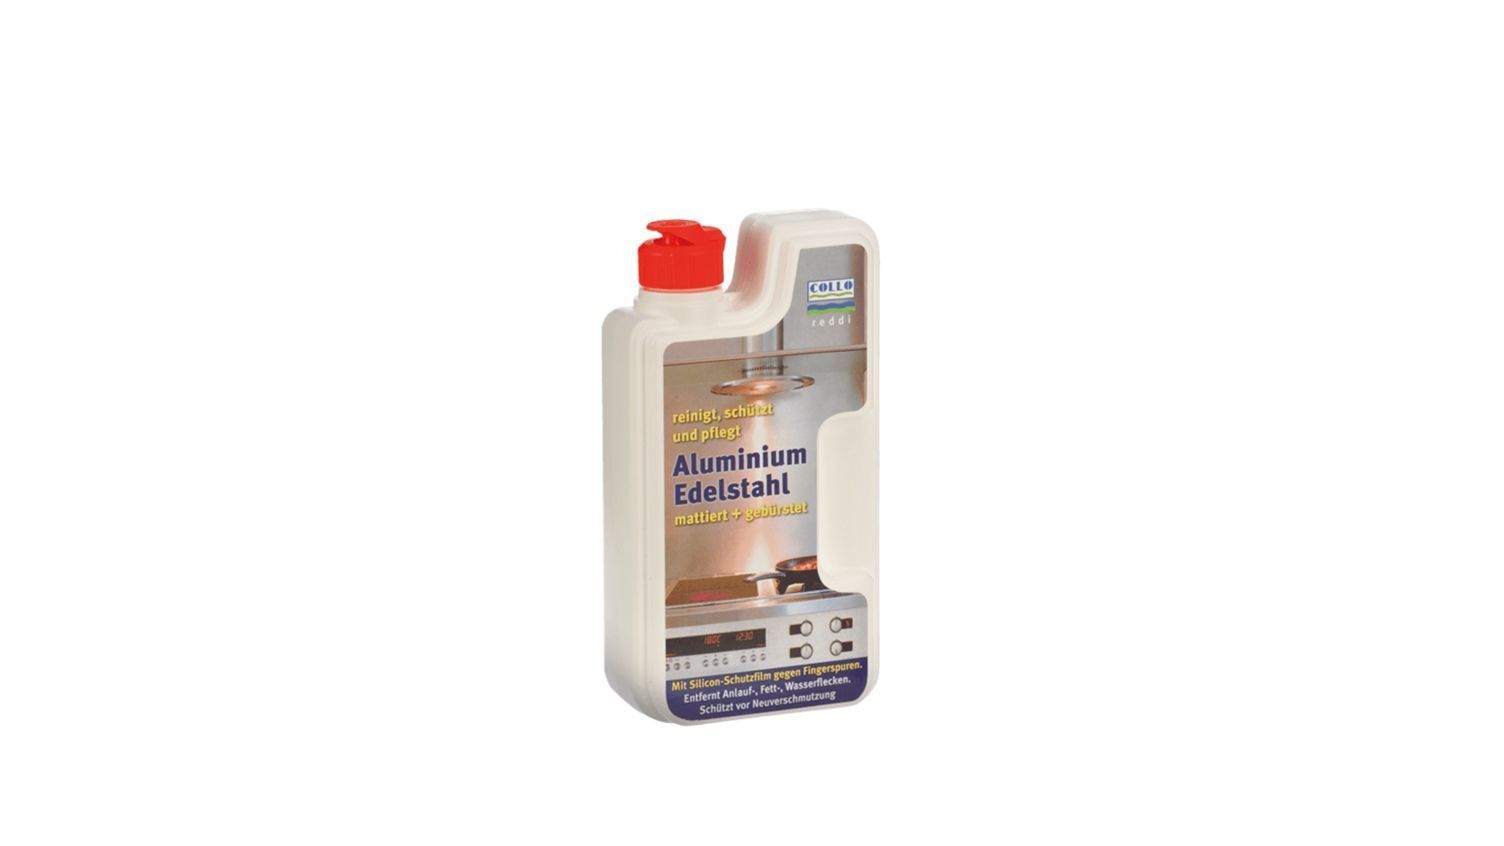 Cleaning Agent (Restores Shine, Removes Grease and Water Stains, 250ml) for Bosch Siemens Stainless Steel & Aluminum - 00461731 BSH